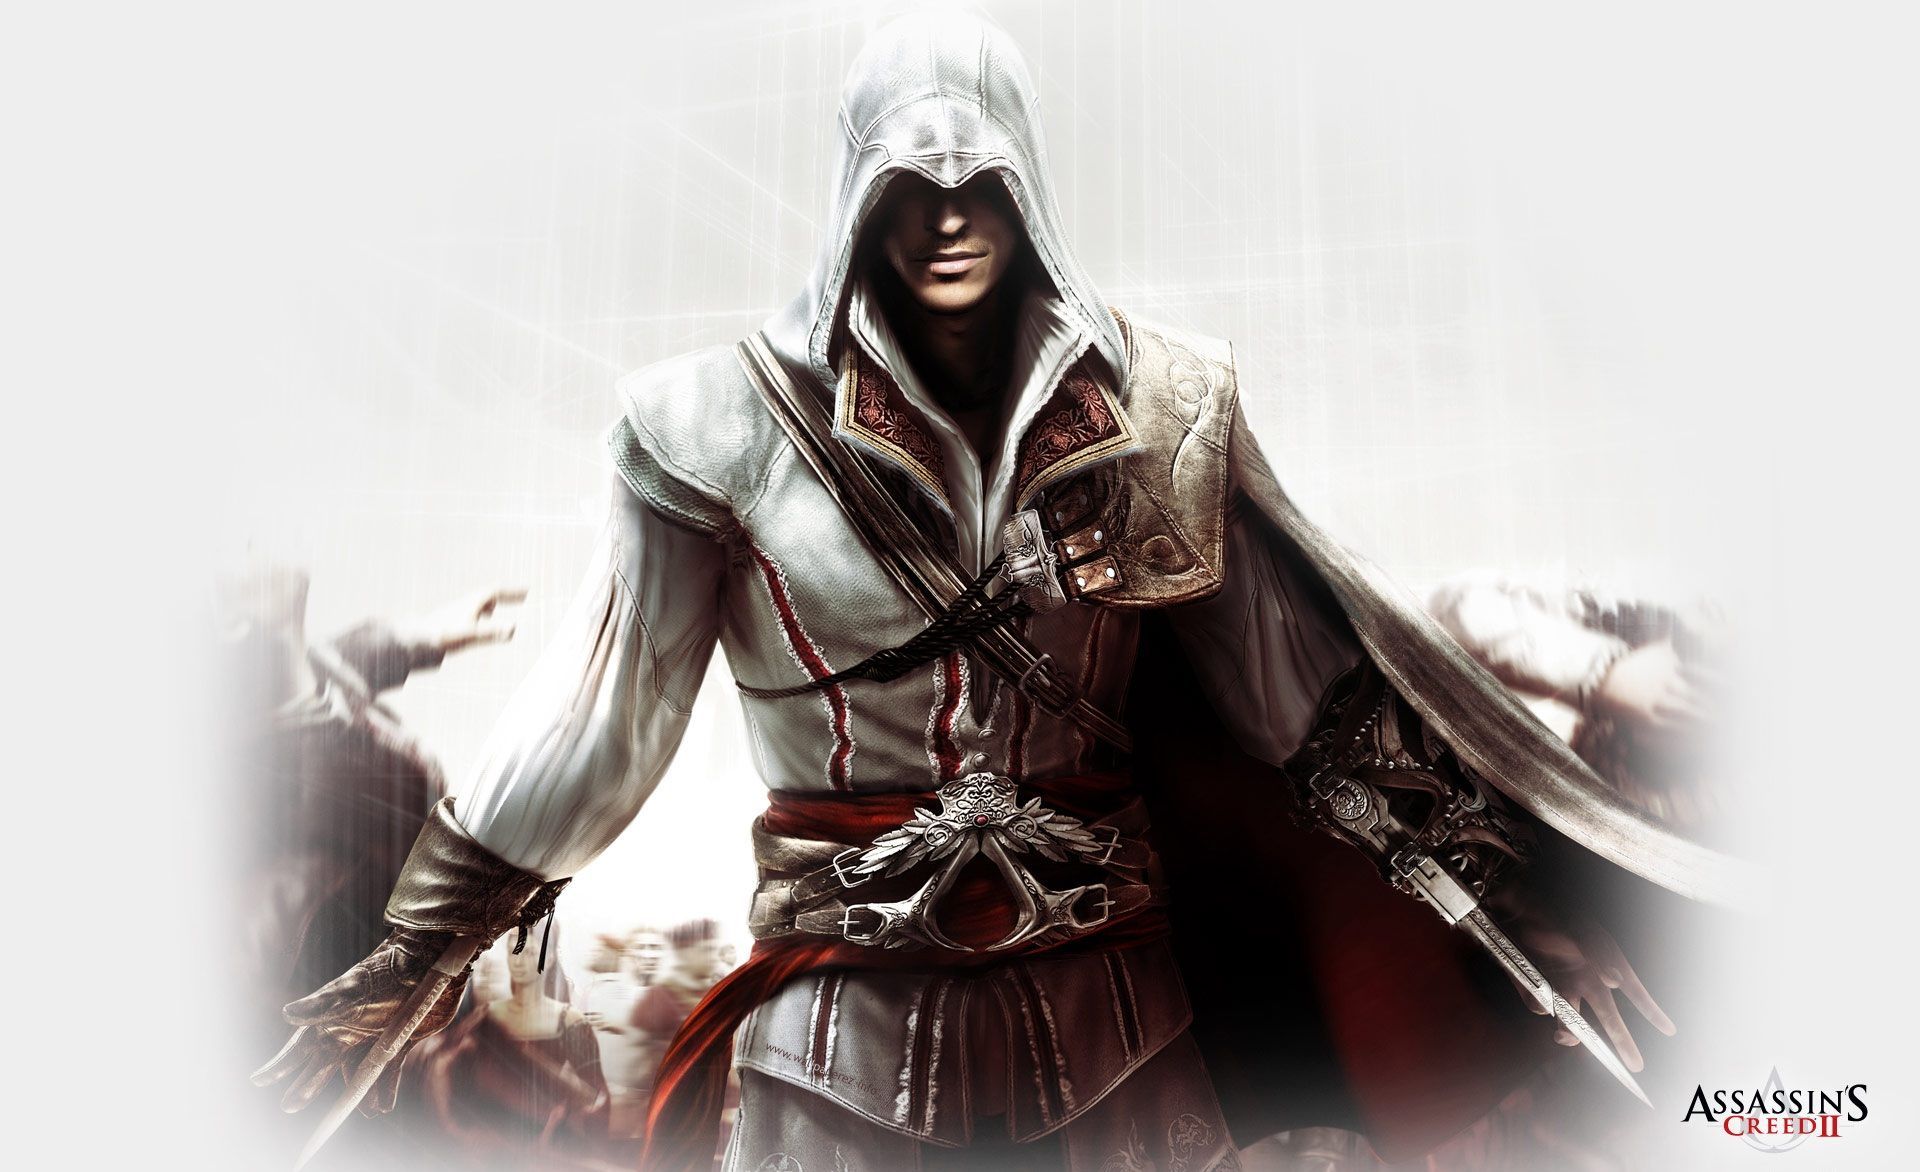 Assassins Creed II Best Game HD Wallpapers - All HD Backgrounds